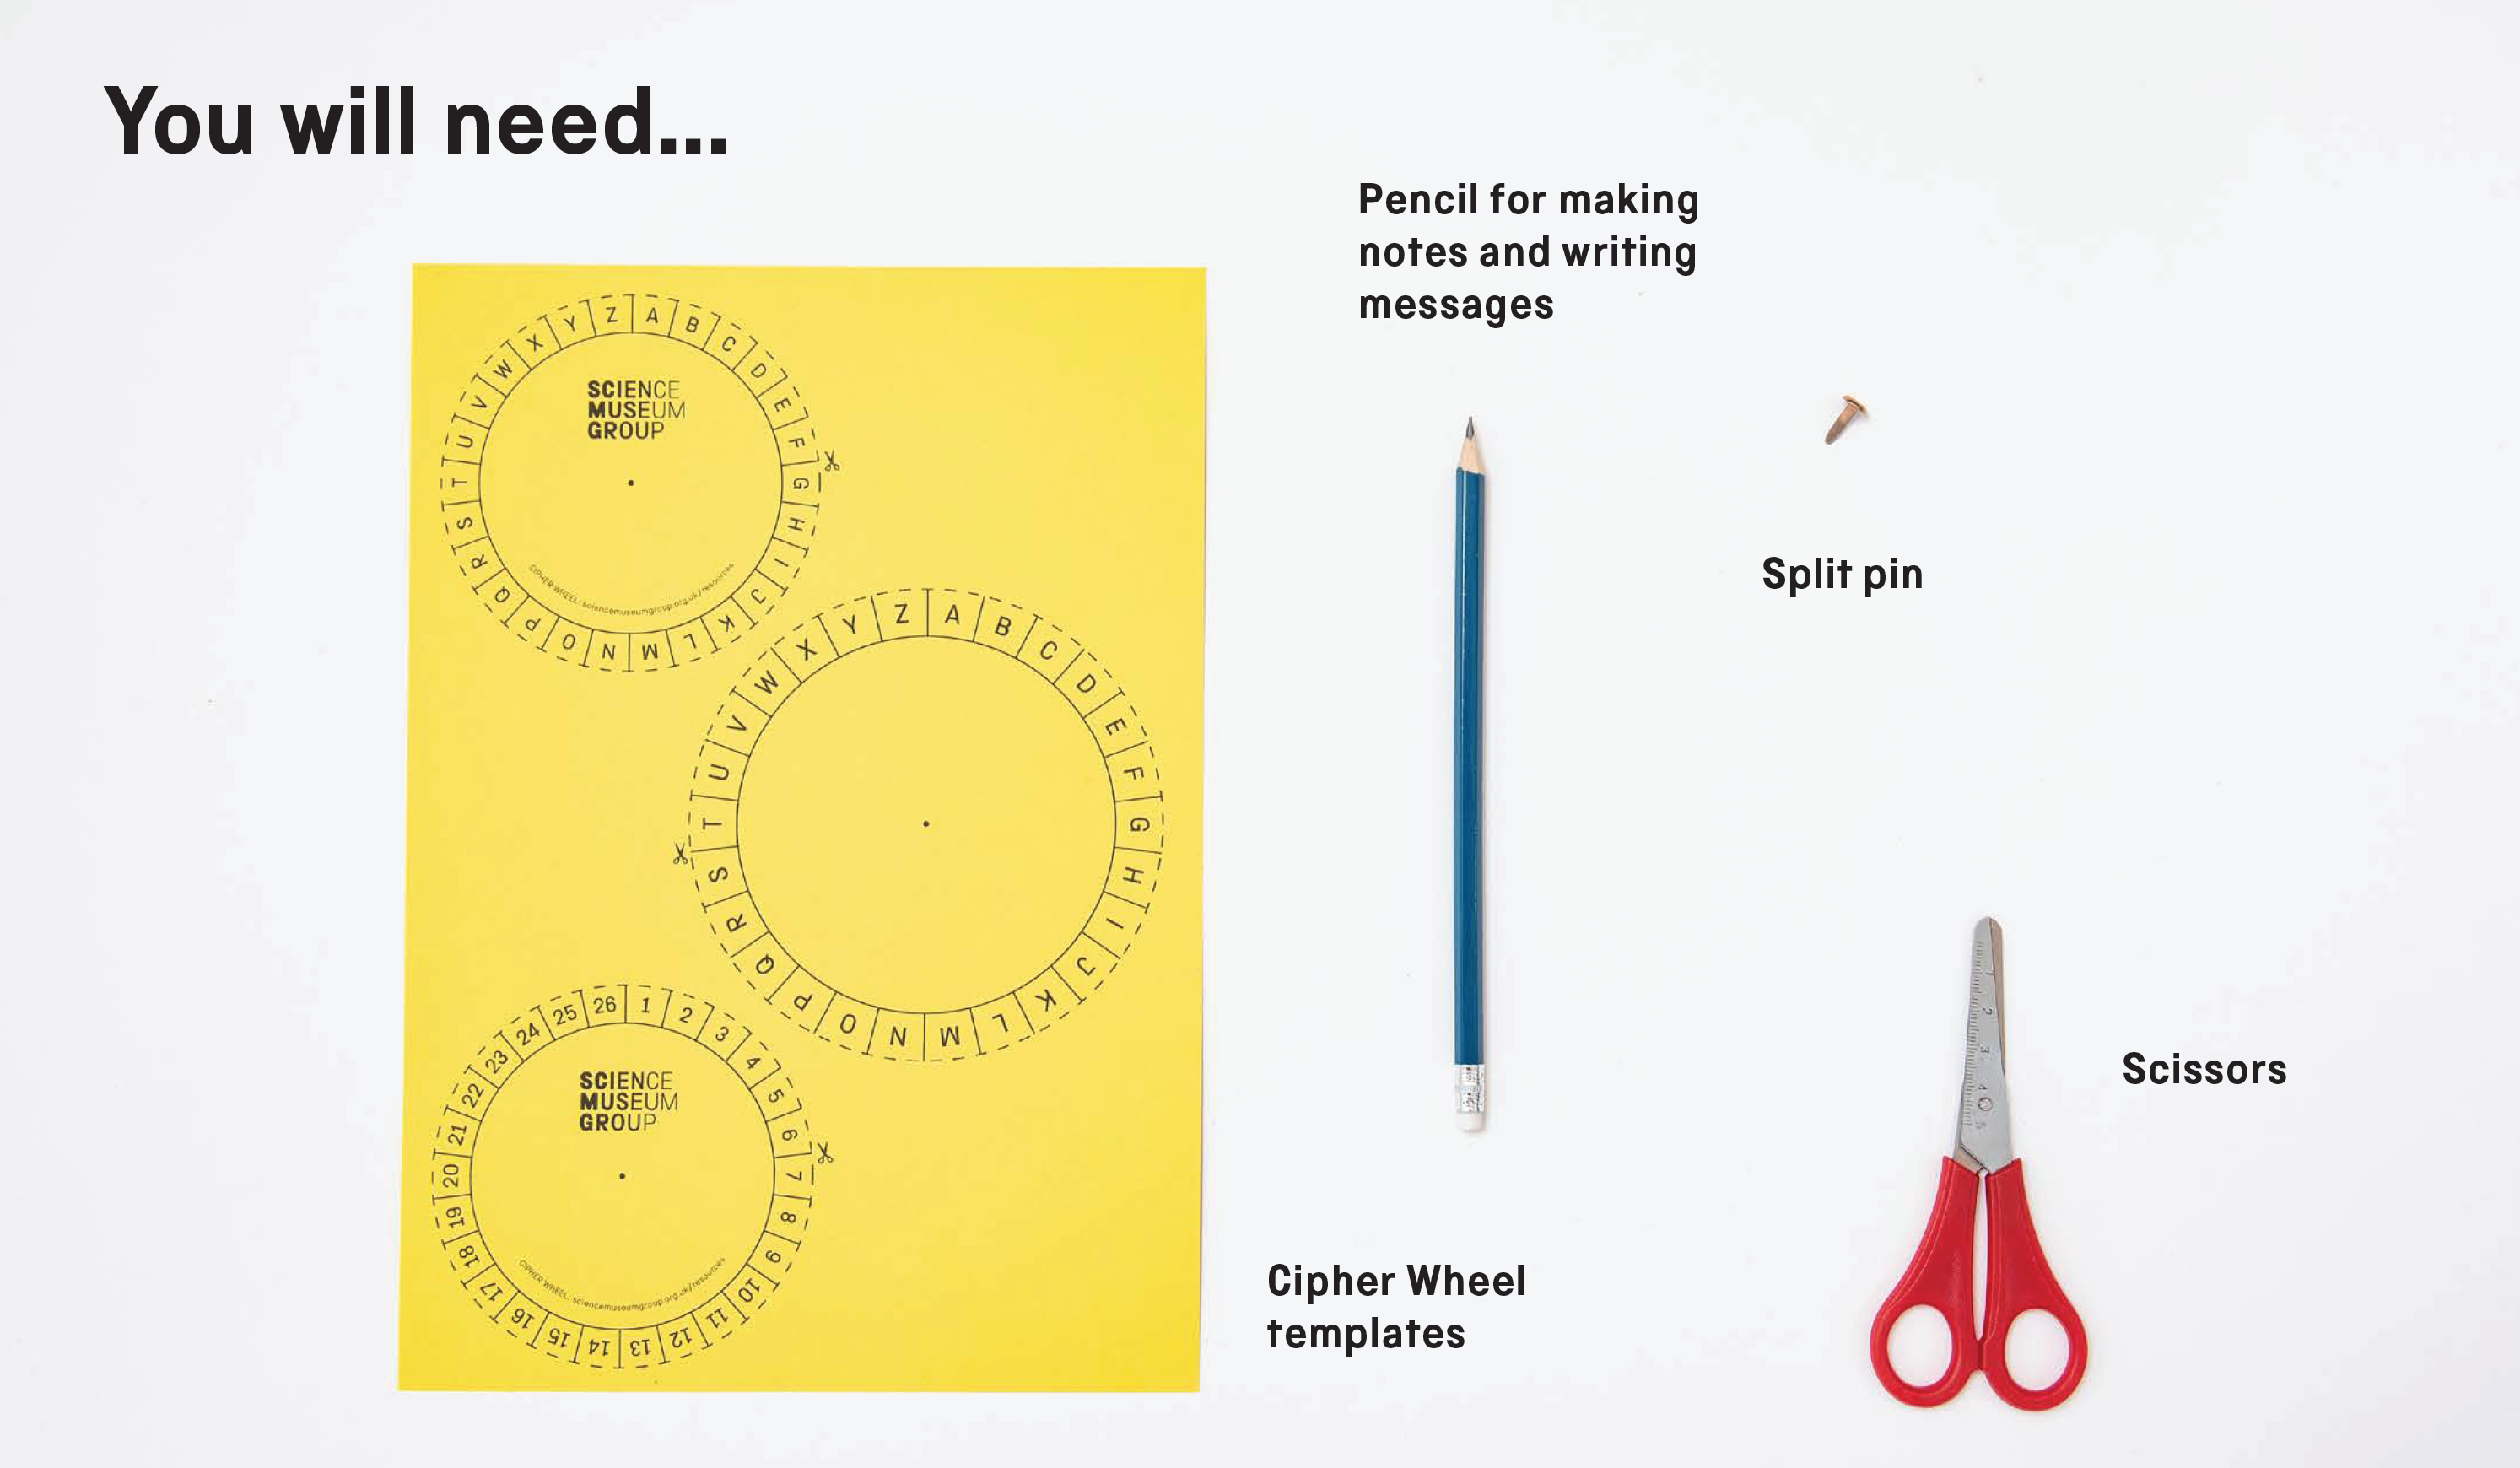 You will need: printed Cipher Wheel templates, a pencil for making notes and writing messages, a split pin and scissors.